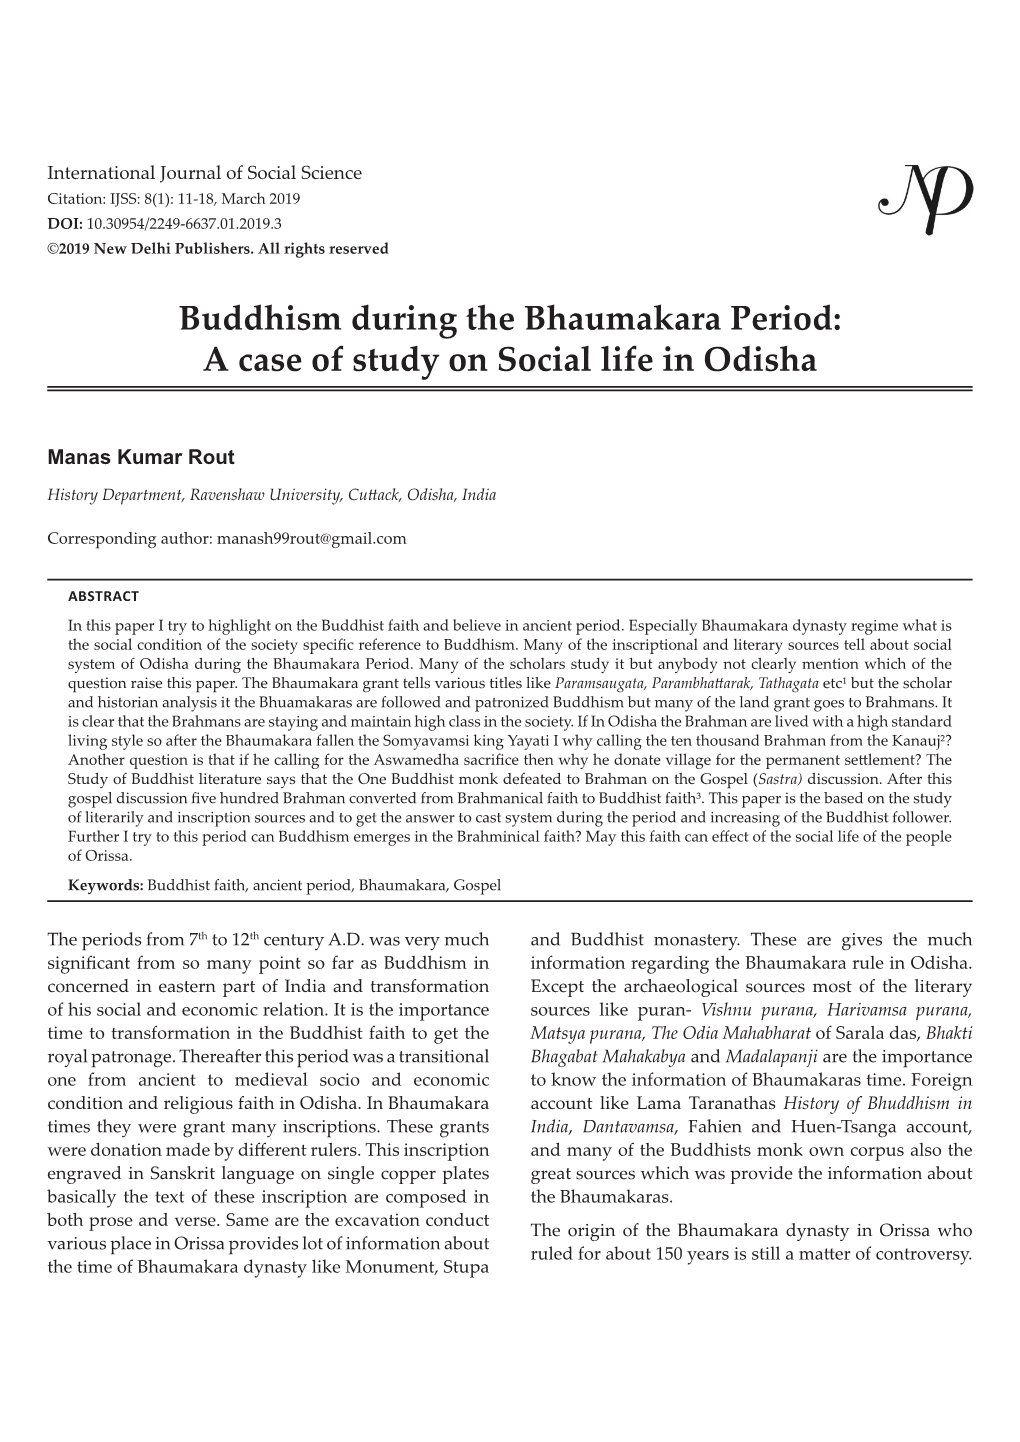 Buddhism During the Bhaumakara Period: a Case of Study on Social Life in Odisha